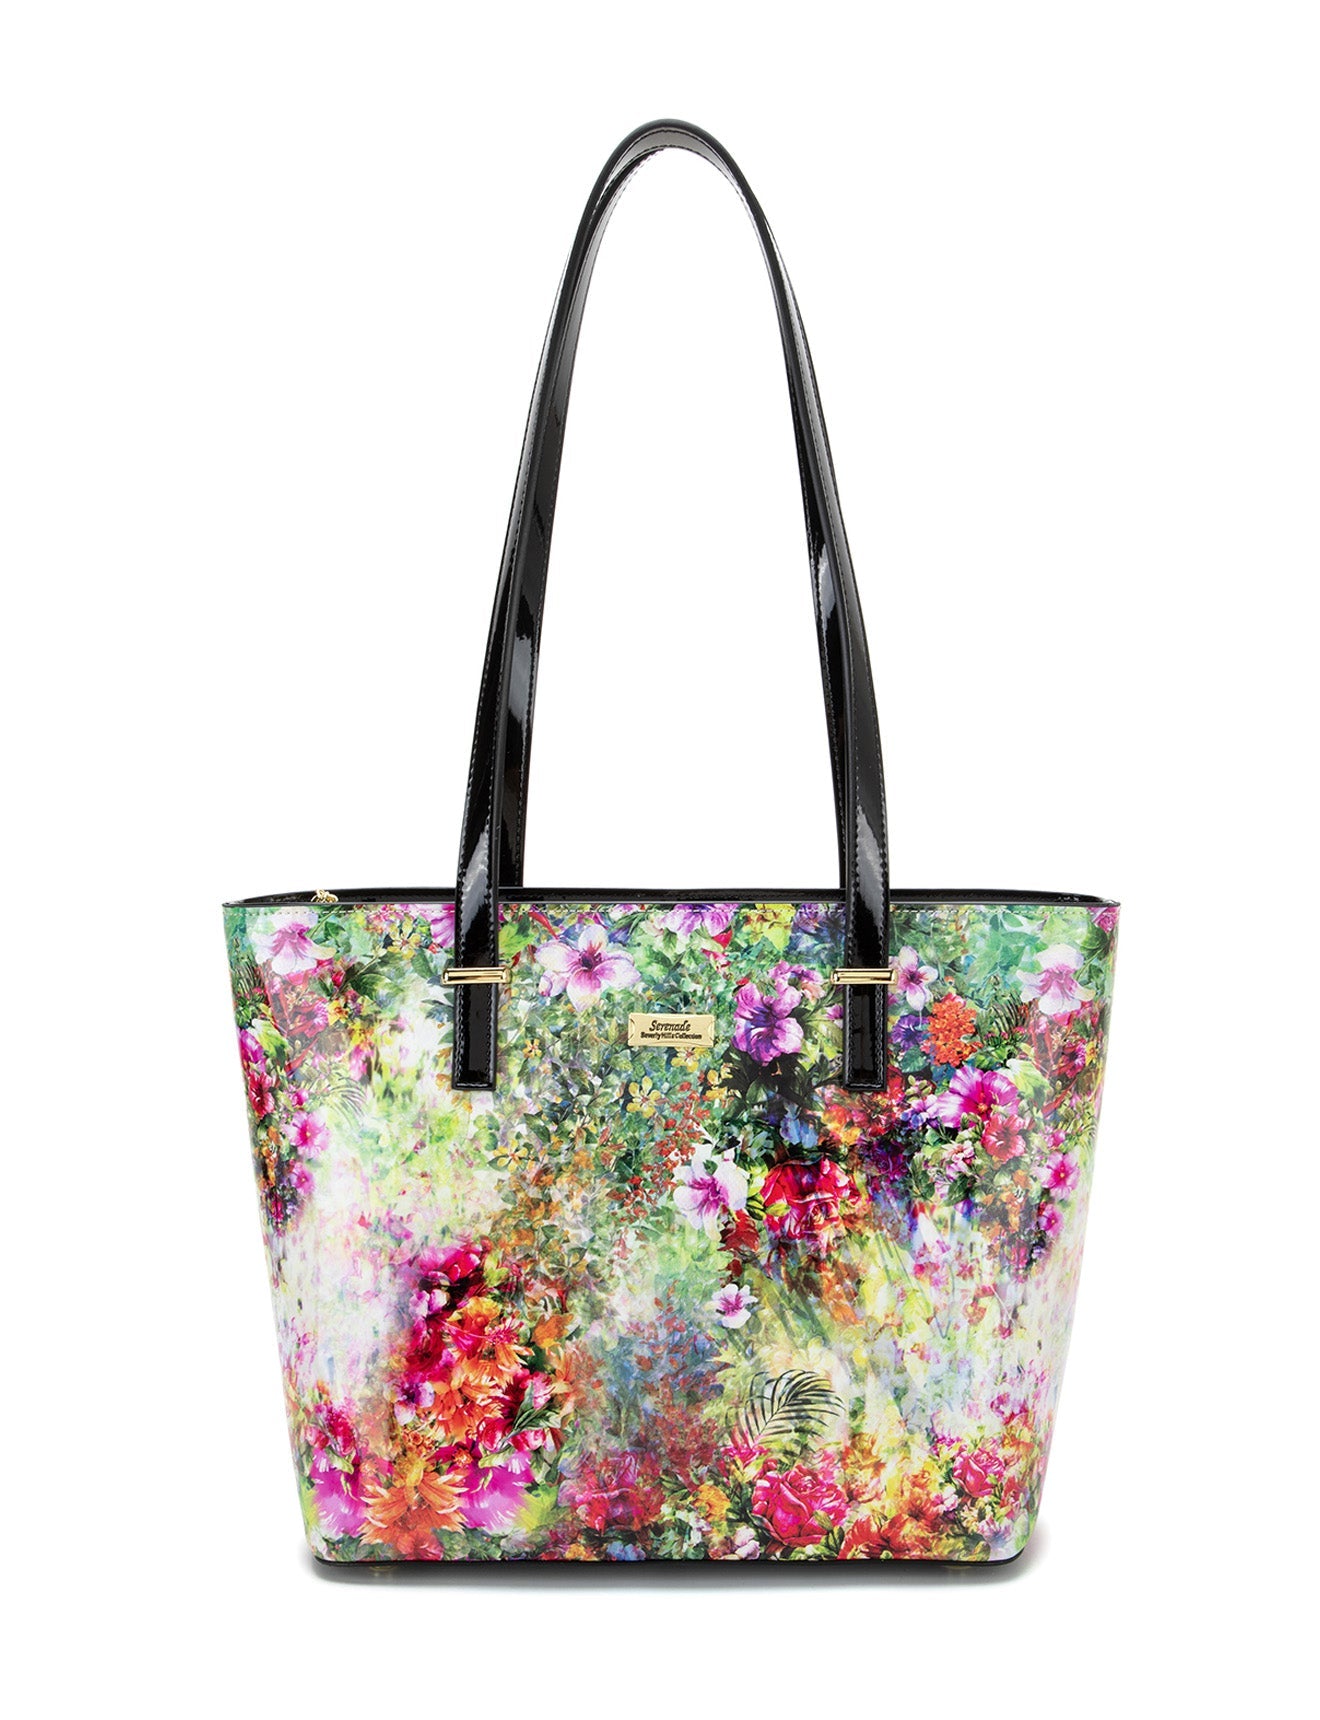 Serenade - SN81-0817 Fiore Large Leather tote - Floral